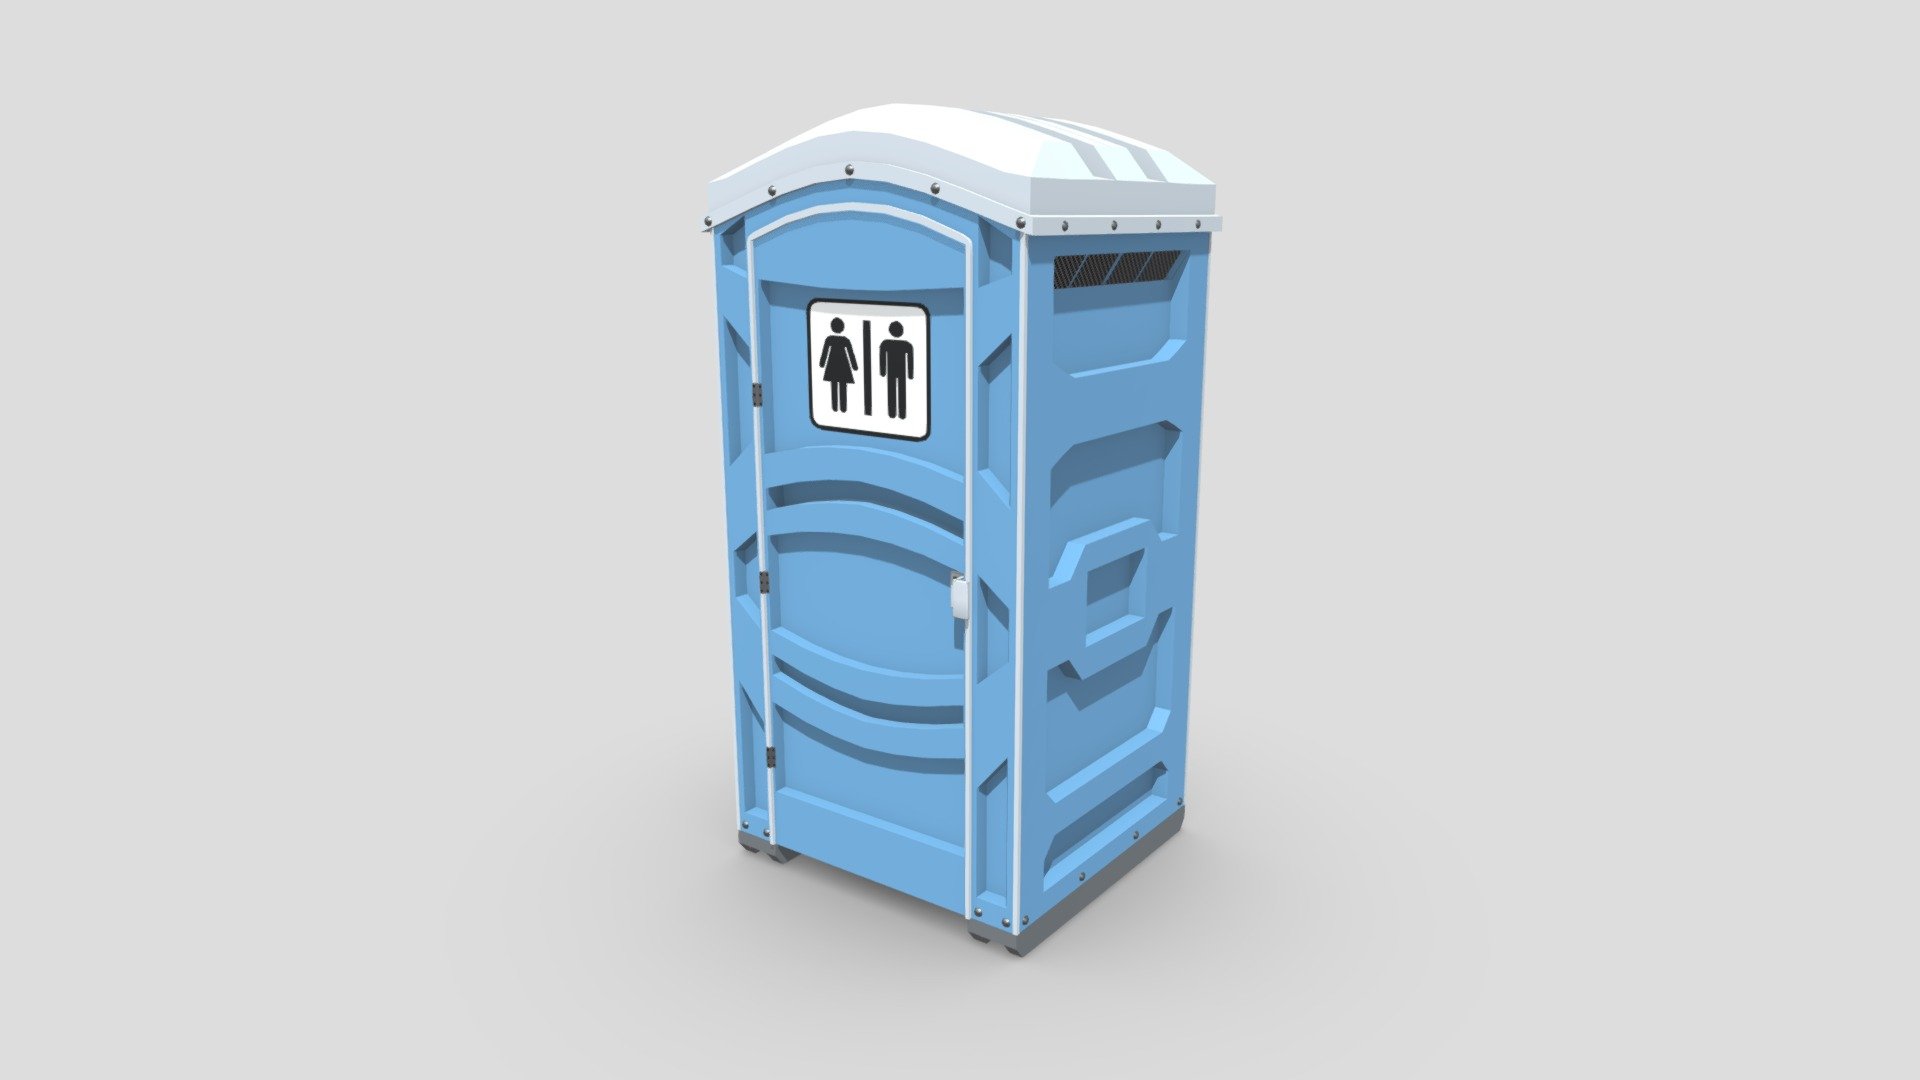 Low poly Portable Toilet object that was created using Blender. This object has the key parts you would find on a real-world object such as supports that elevate the object and allow easy transportation, bolts to hold everything together, and air vents at the top. This object was made using the metalness workflow and PBR textures.

Features:




Object uses metalness workflow and 4K PBR textures in PNG format

Object has been manually UV unwrapped to match its PBR textures

Blend file includes pre-applied textures, cameras, and lighting setups

Object has been exported in 4 file formats (FBX, OBJ, GLTF/GLB, DAE/Collada)

Files have been archived in an easy to follow hierarchy

Images were rendered using the cycles engine

Included Textures:




AO, Diffuse, Roughness, Gloss, Metallic, Normal

UVLayout

The source file that is uploaded is for demonstration use and is uploaded in FBX format. In the additional file you will find all model exports and the textures that go along with them 3d model